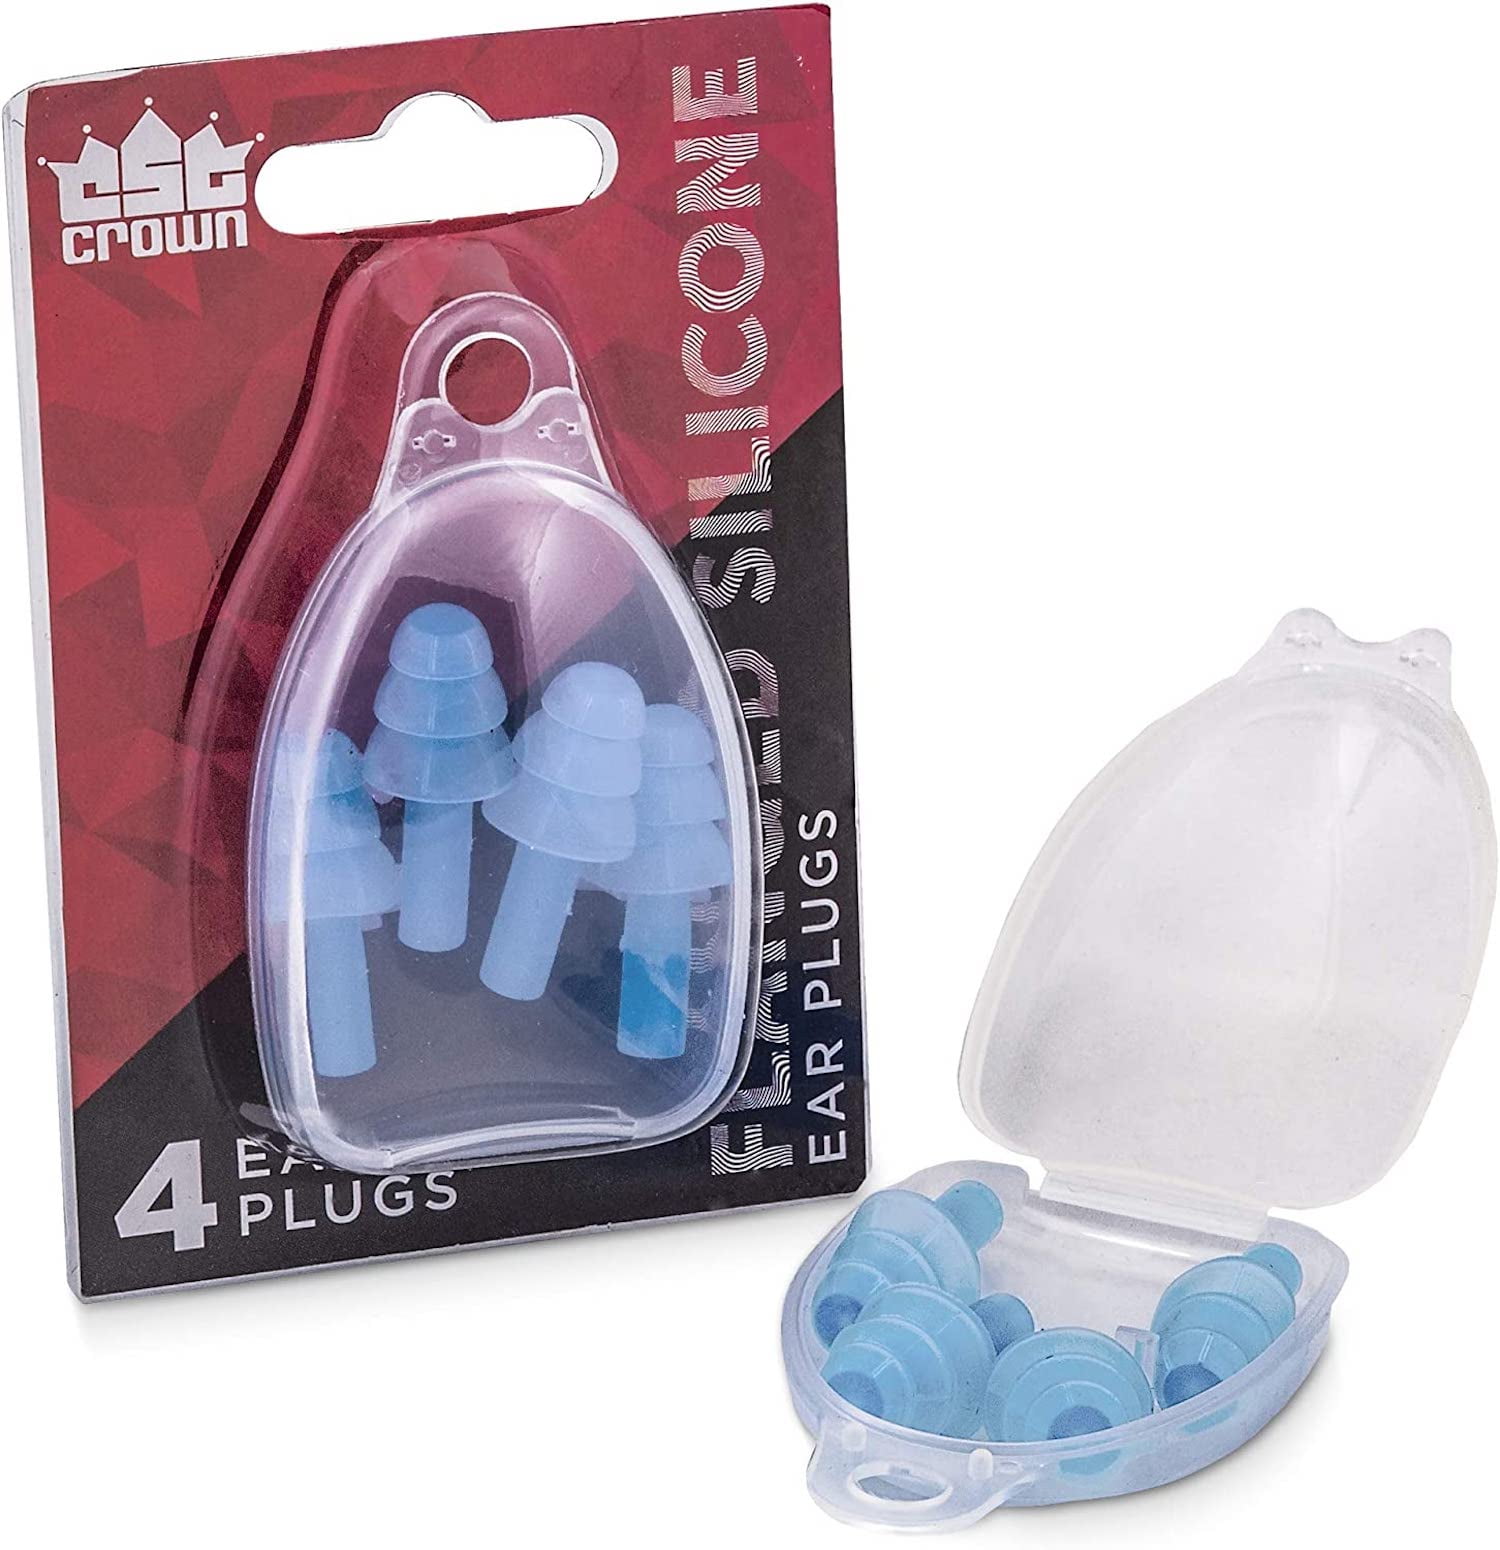 Sswi-501 Silicone Ear Plugs Case, Blue - Pack Of 4